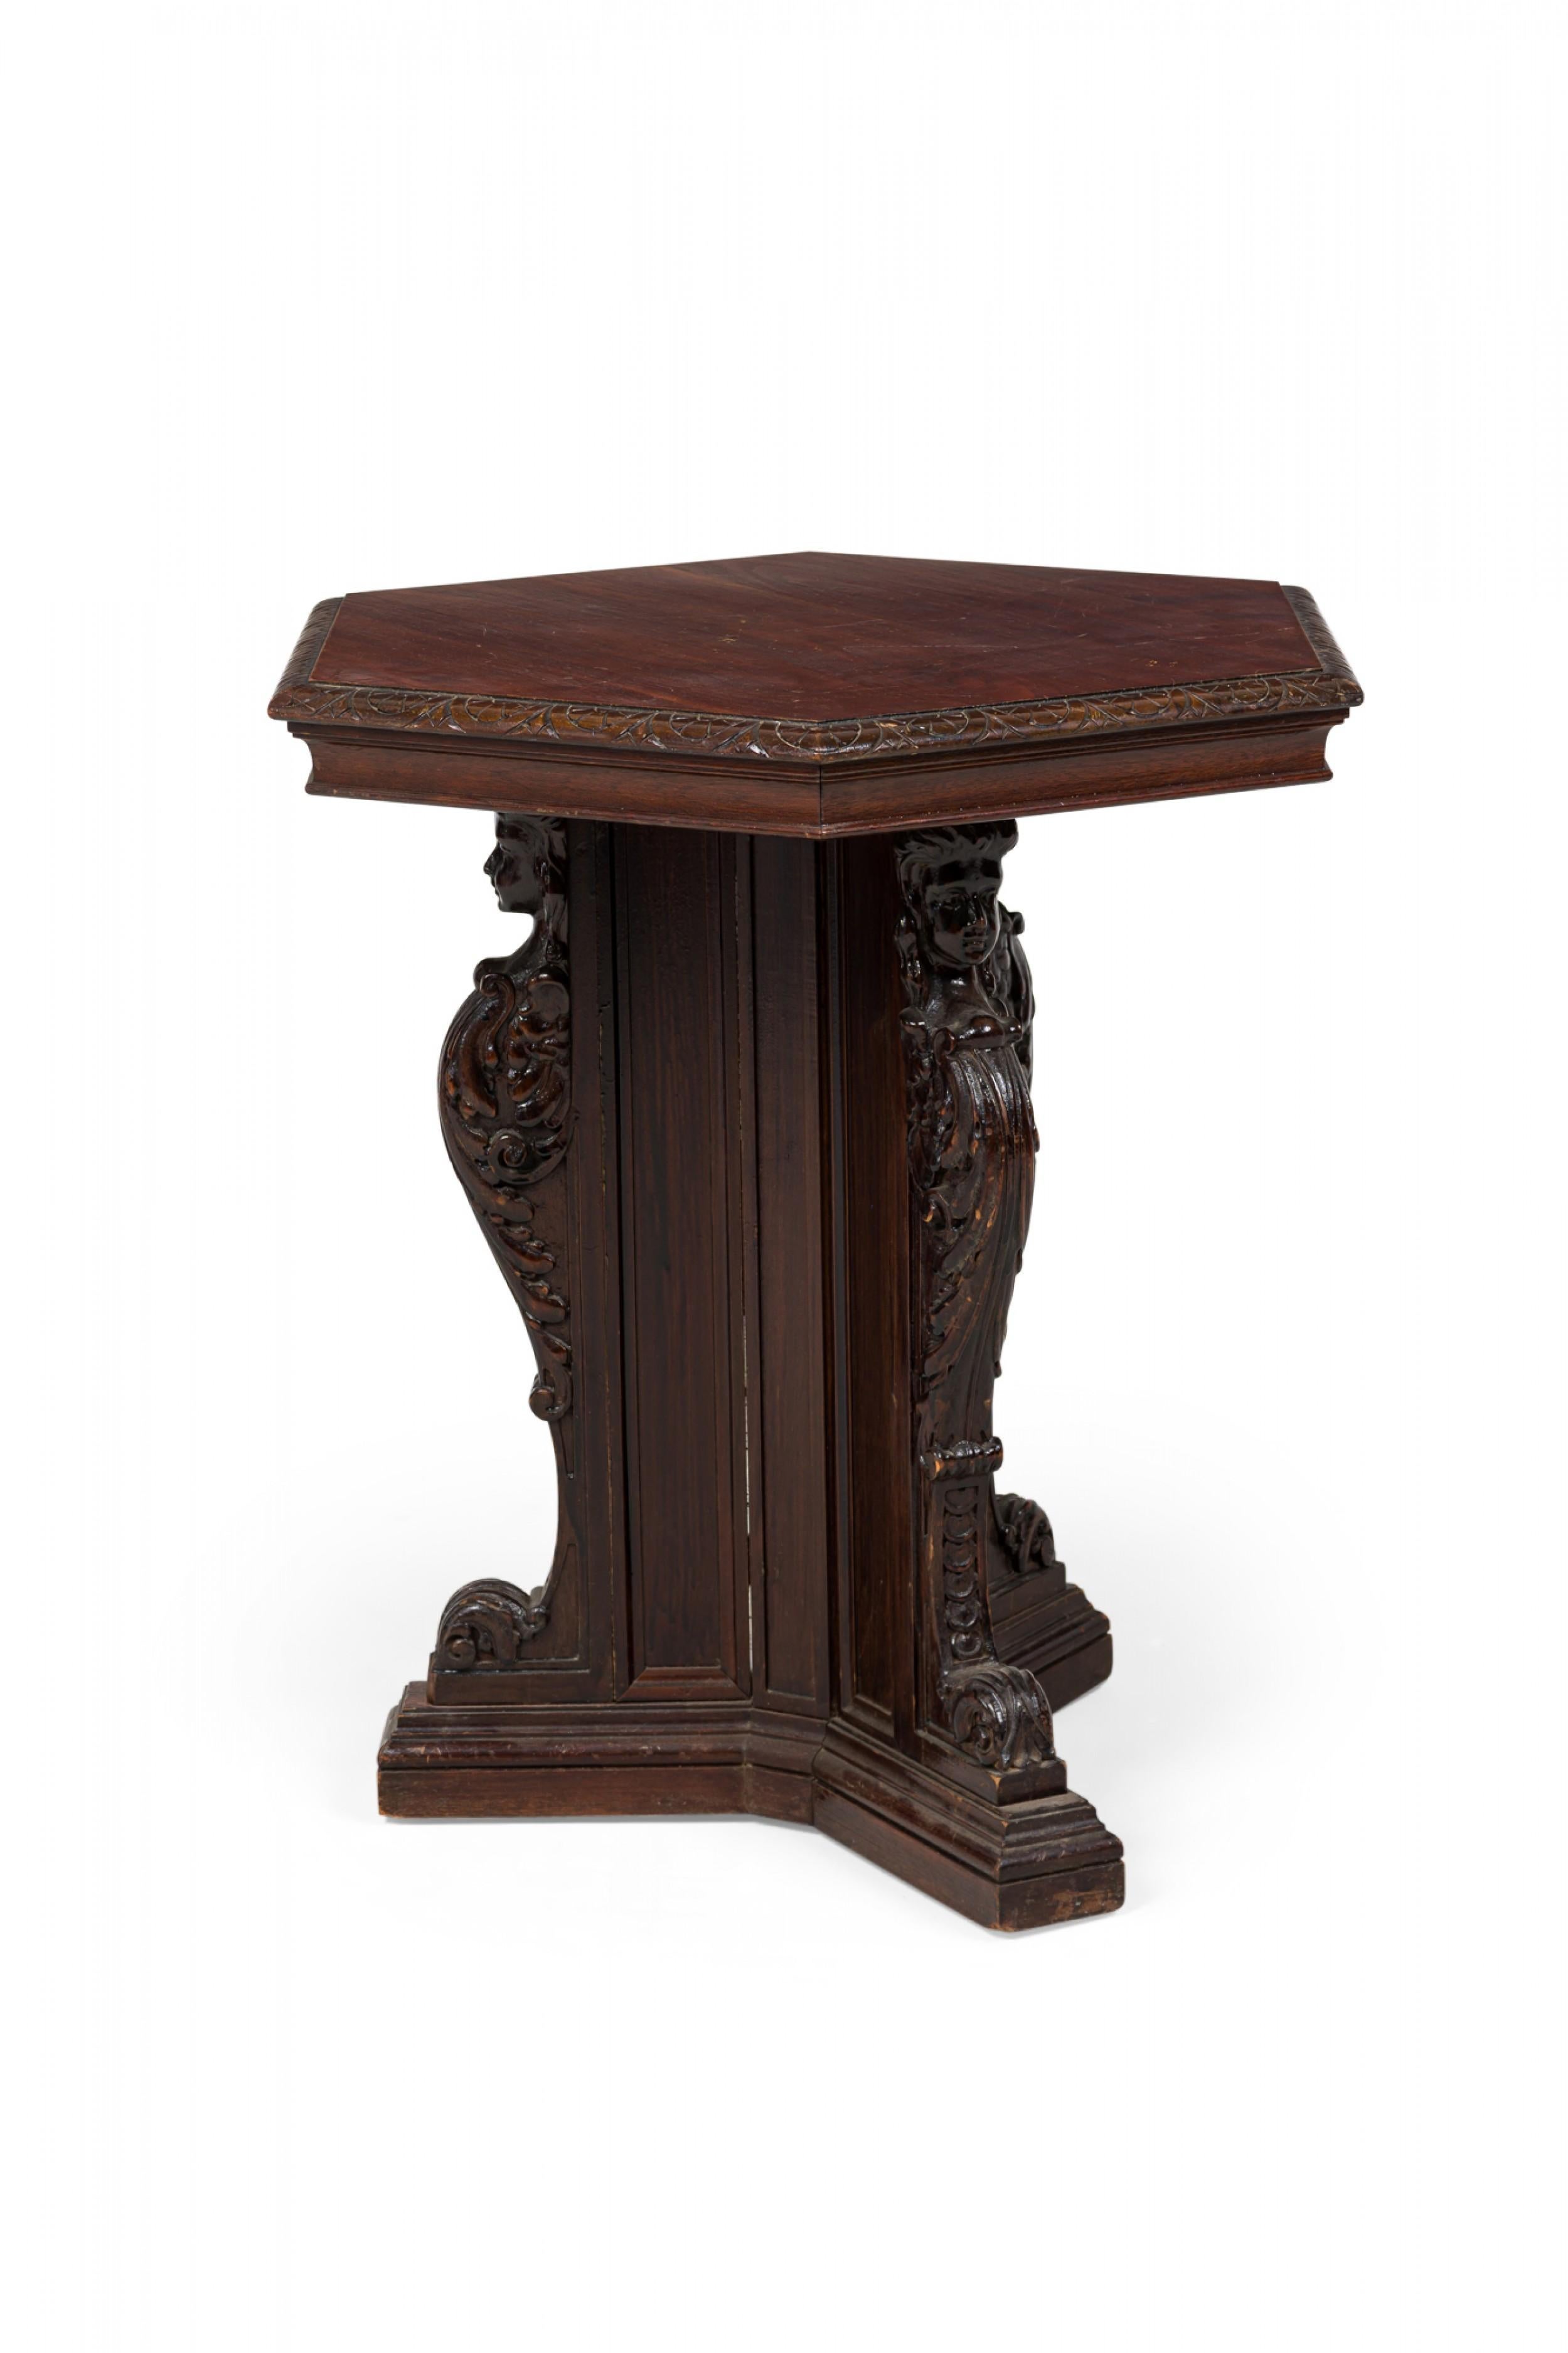 20th Century English Victorian-Style Carved Mahogany Hexagonal Occasional / End Table For Sale